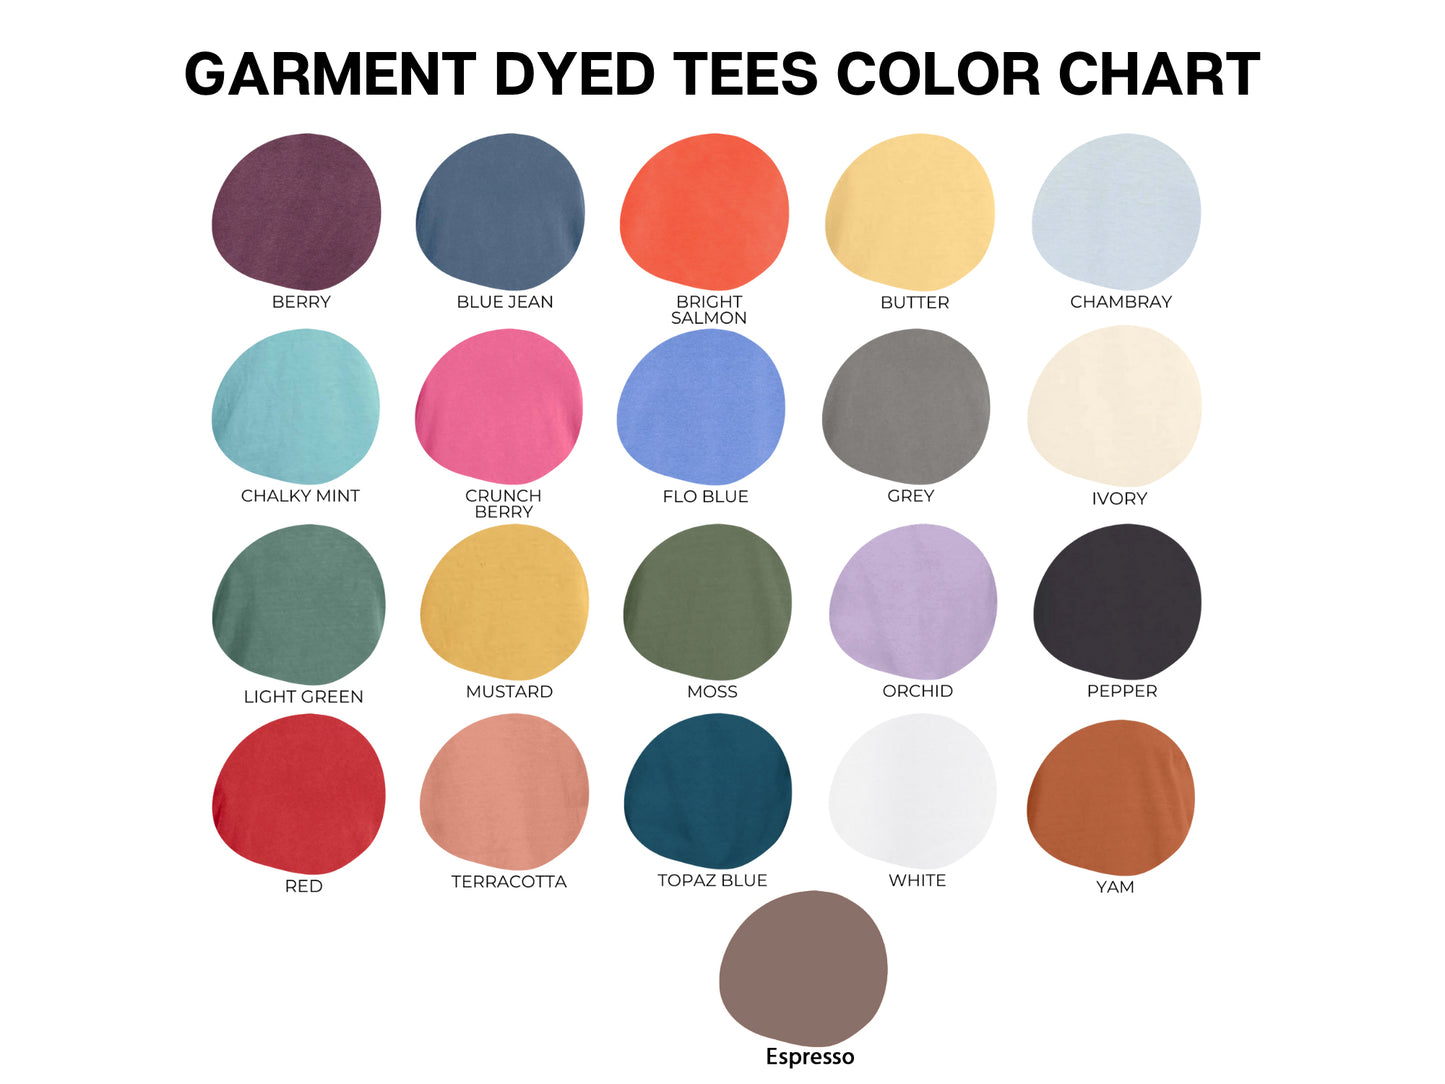 Do Good and Share | Garment Dyed Tee